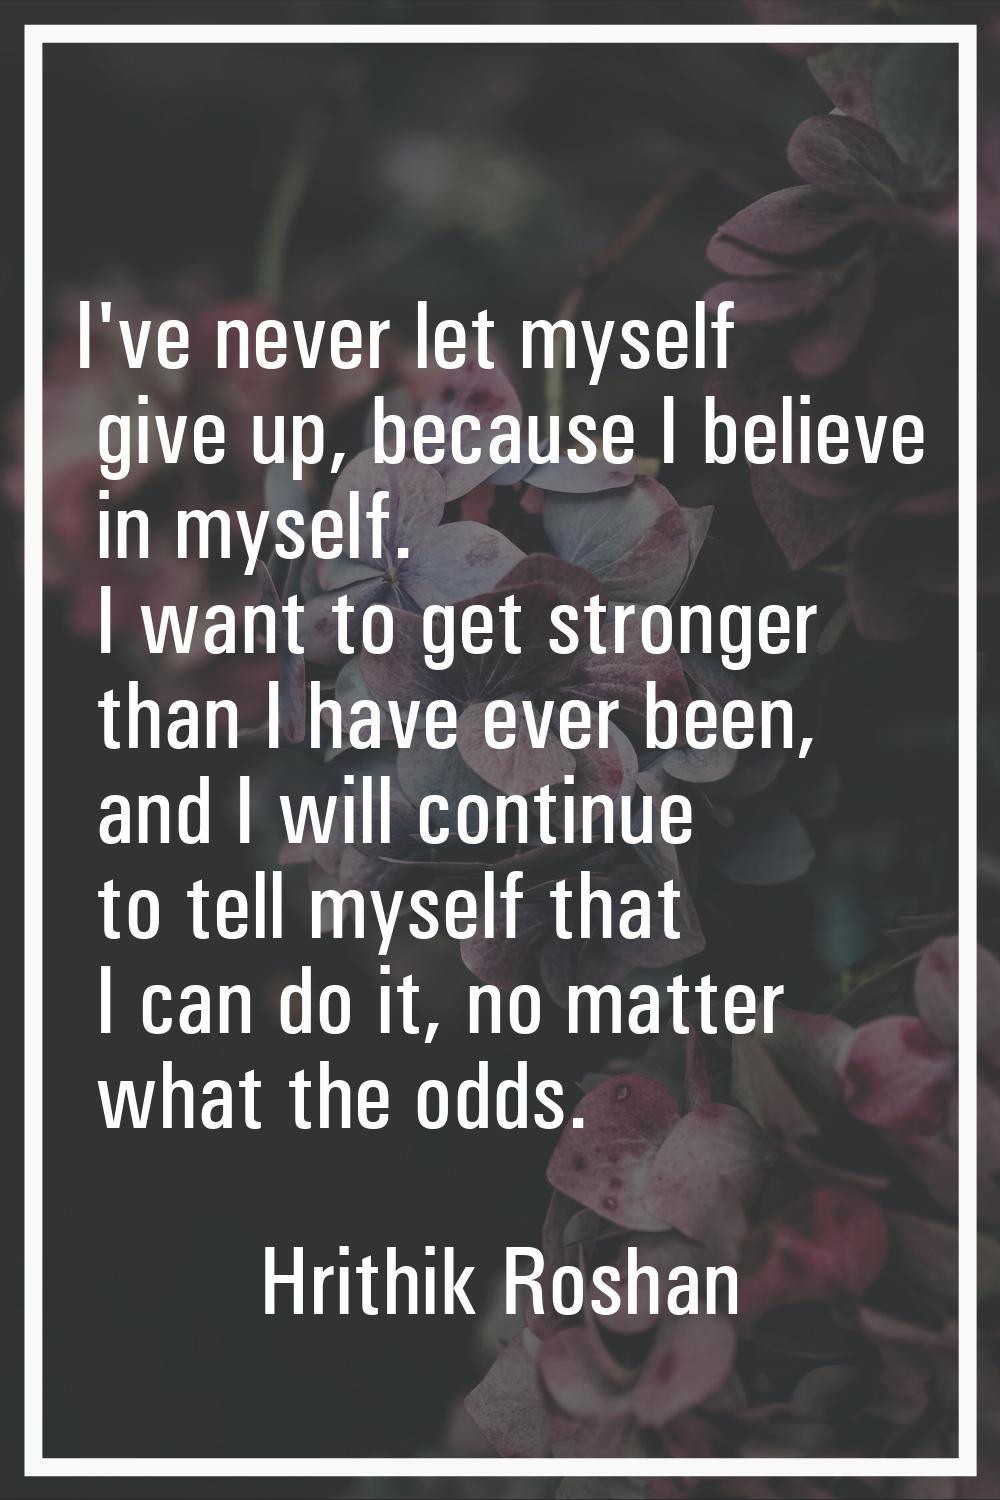 I've never let myself give up, because I believe in myself. I want to get stronger than I have ever